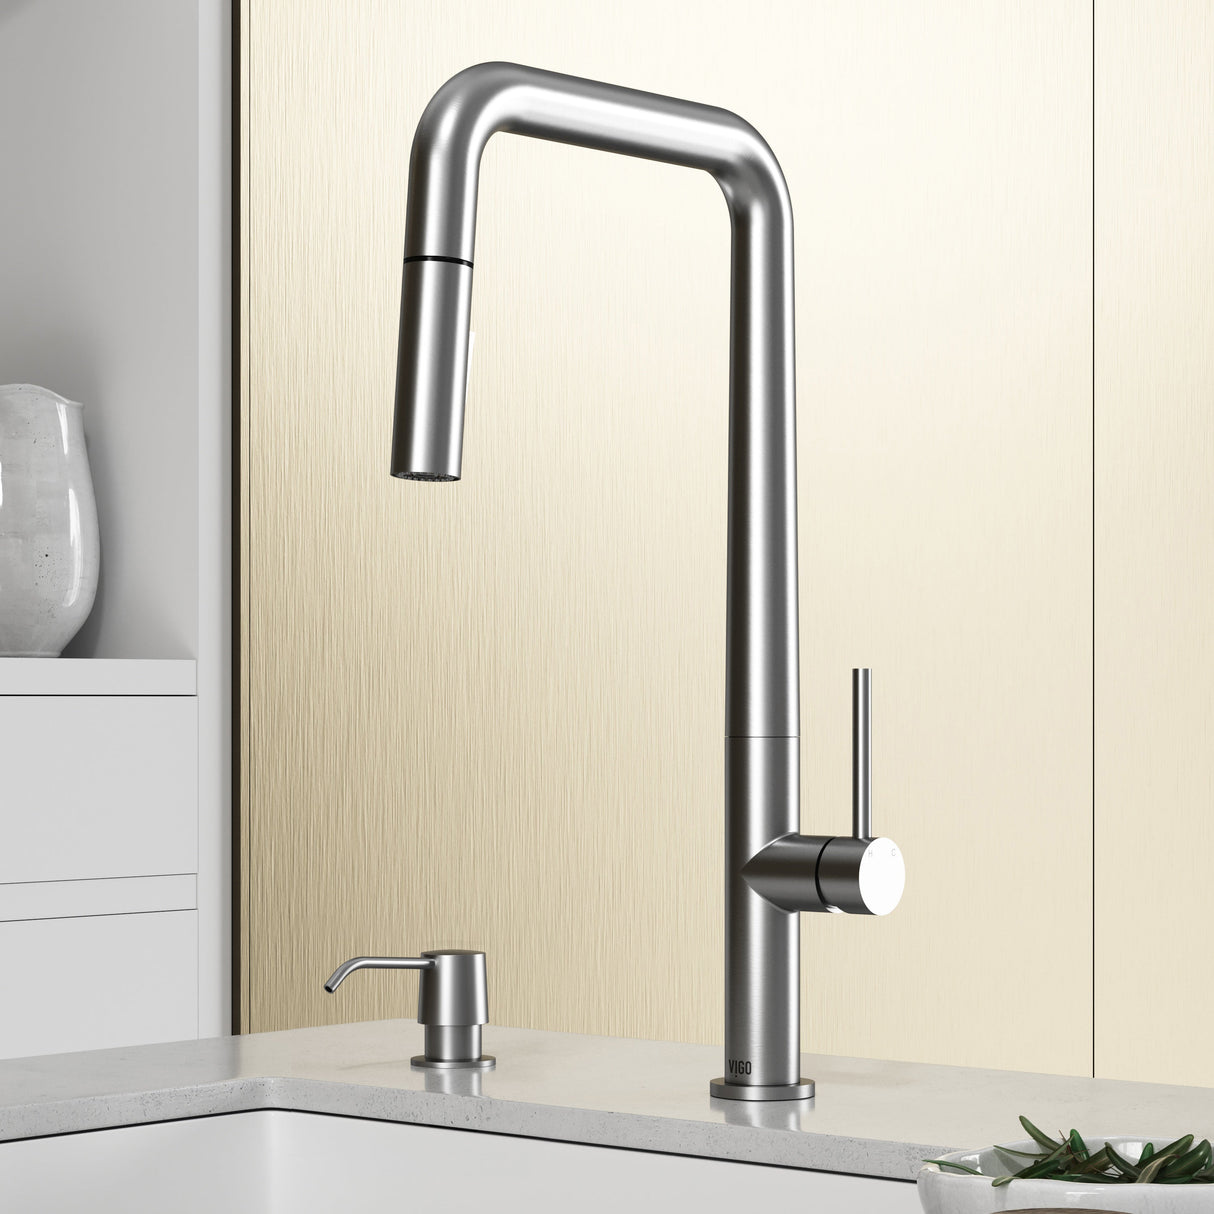 VIGO Parsons Pull-Down Kitchen Faucet with Soap Dispenser in Stainless Steel VG02031STK2